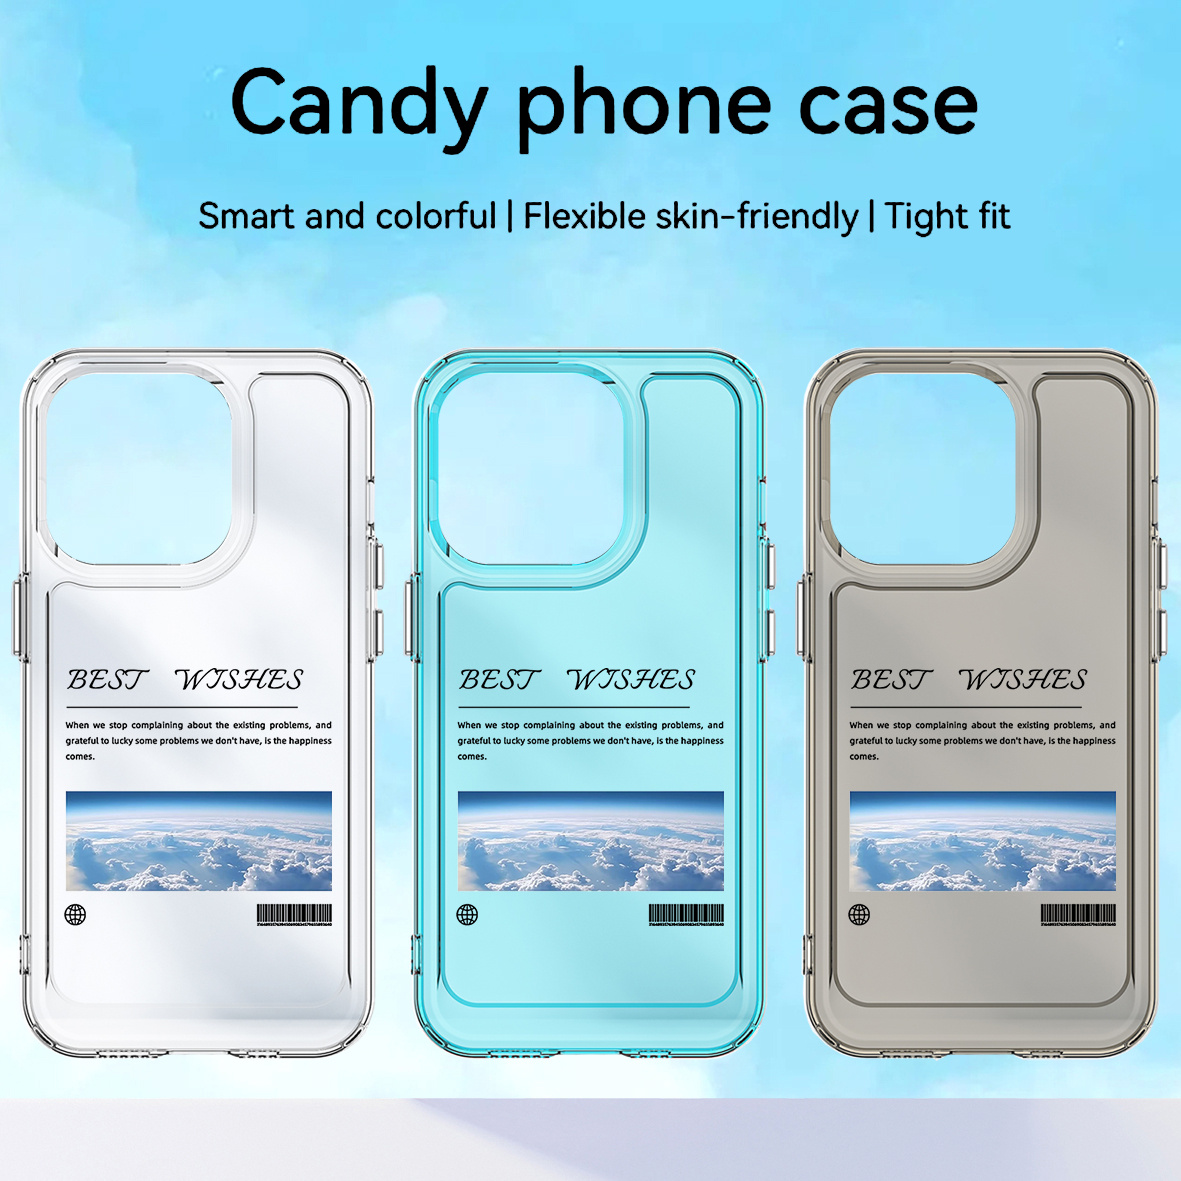 Best iPhone 13, iPhone 13 Pro and iPhone 13 Pro Max Cases of 2023